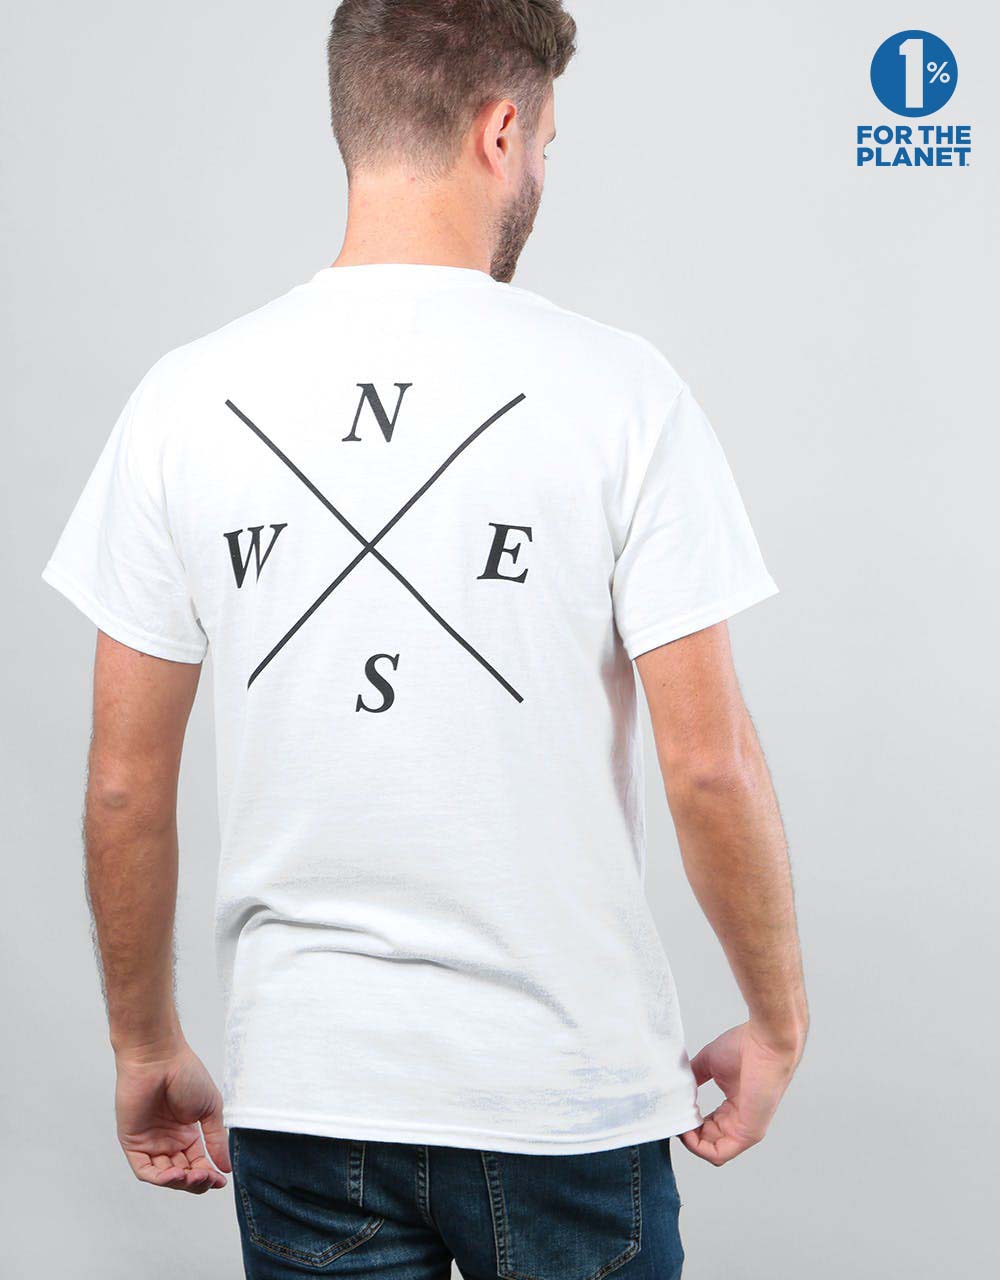 Route One Four Corners T-Shirt - White